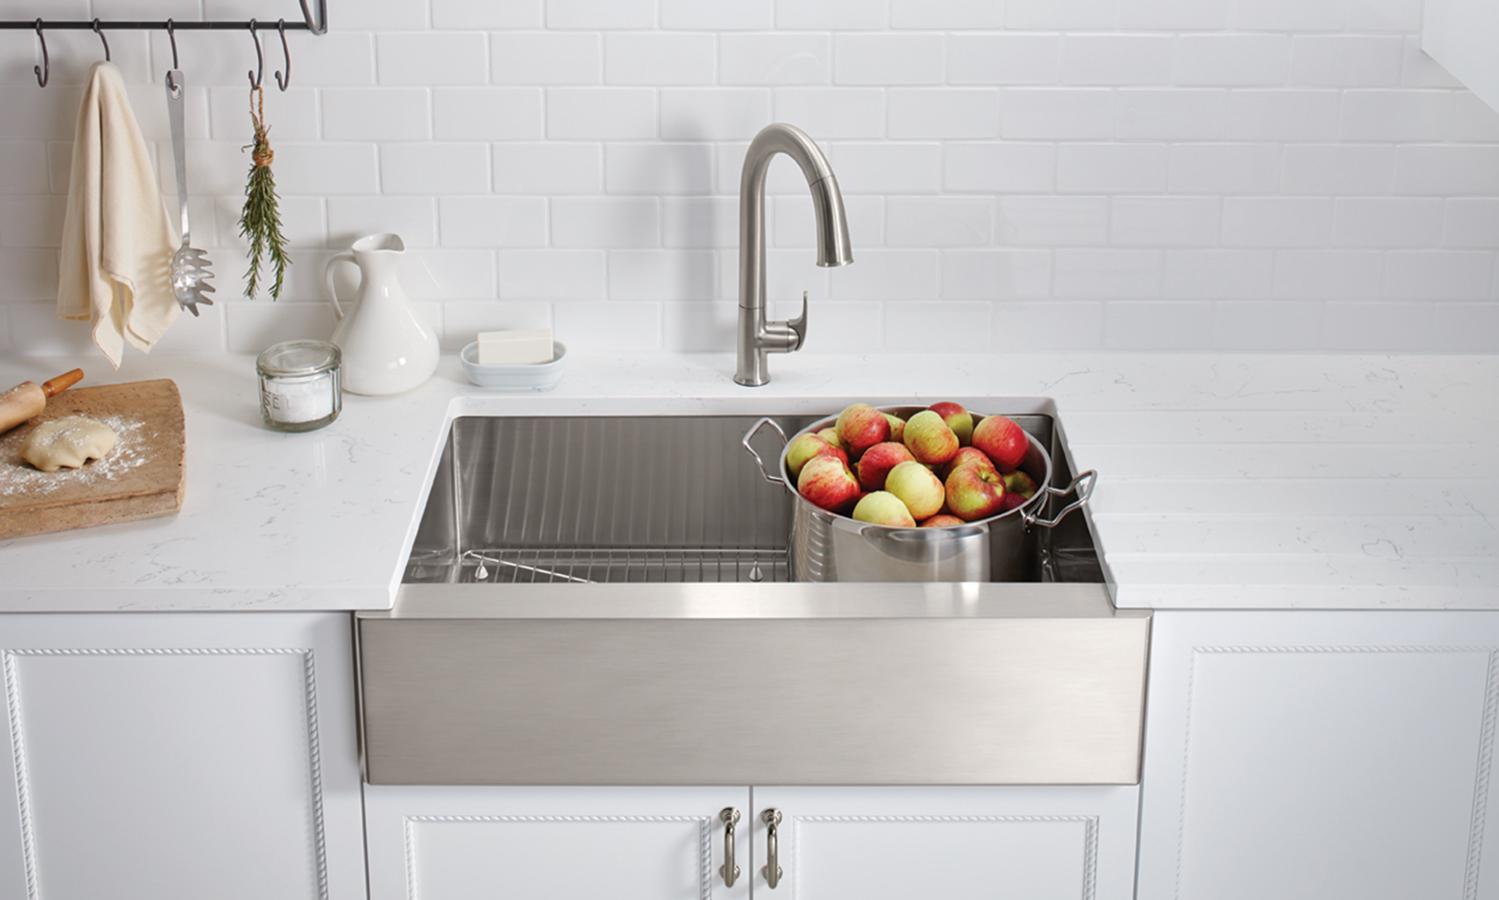 stainless steel under-mount sink, and a faucet, on a white countertop